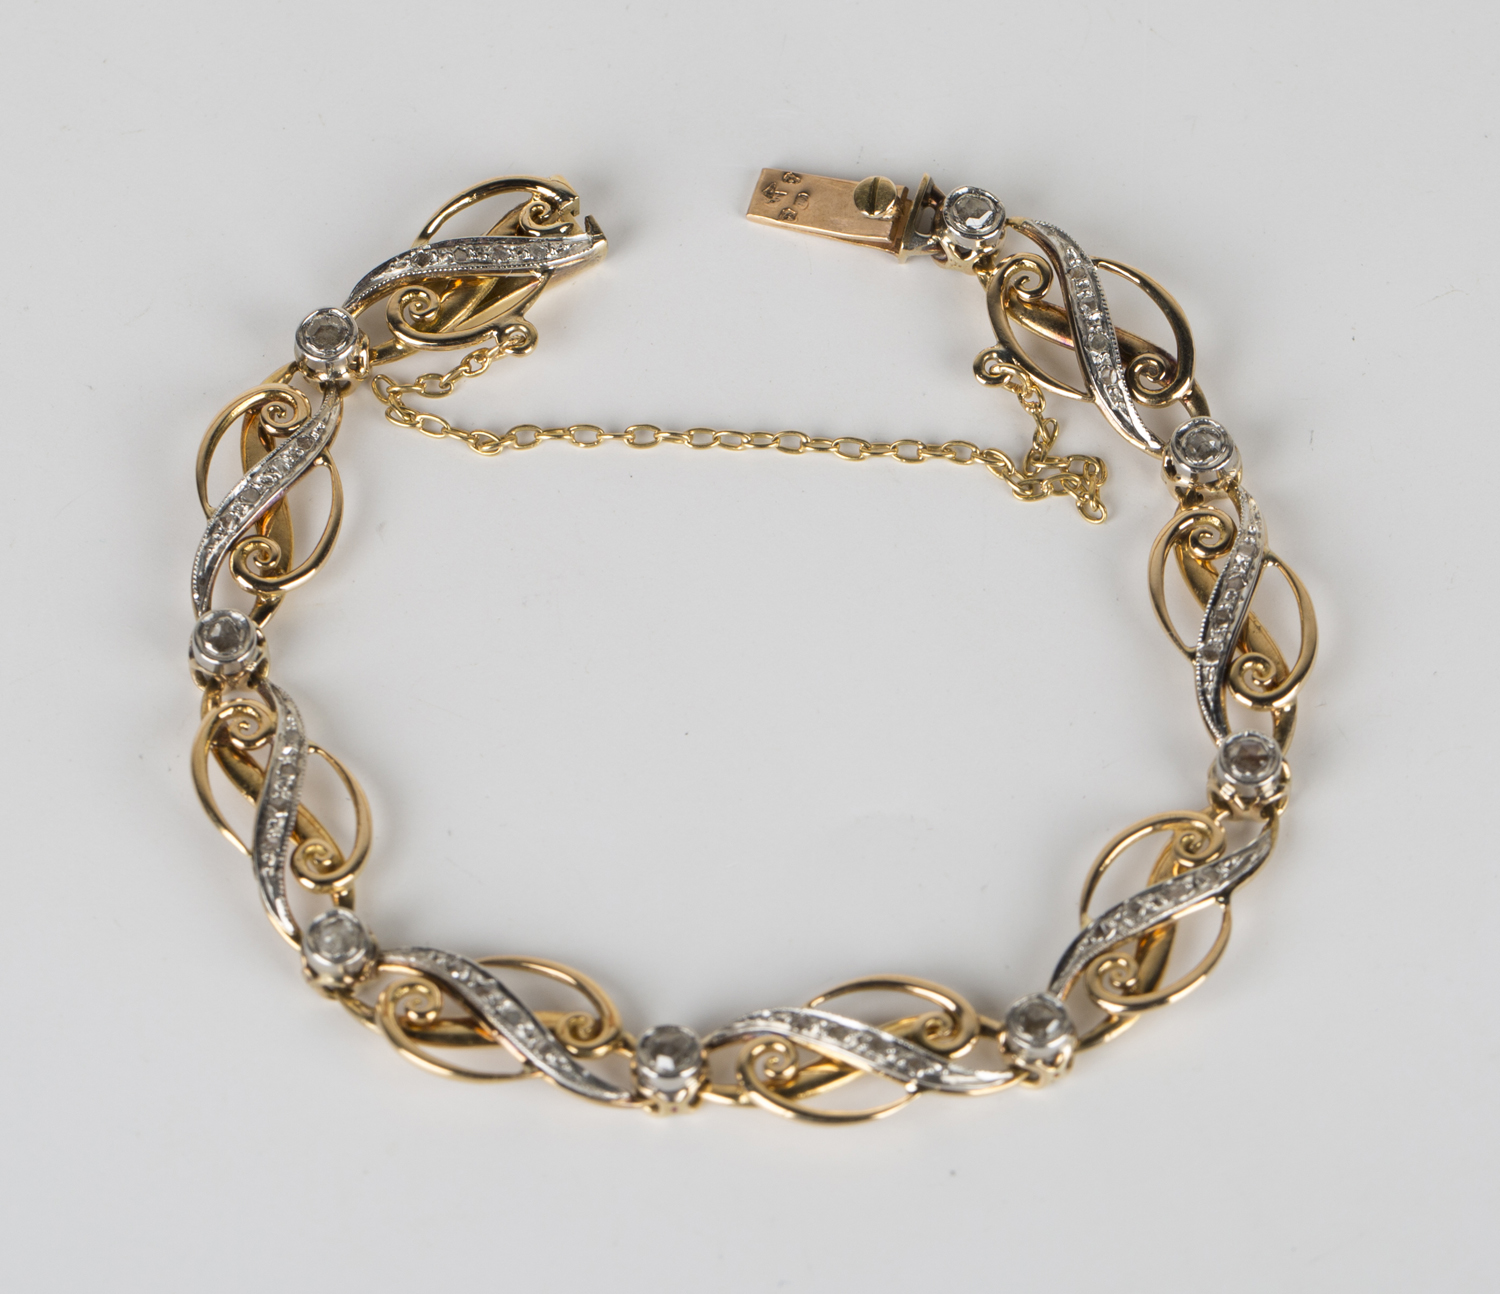 A French two colour gold and diamond bracelet, each link in a scrolling design, mounted with rose